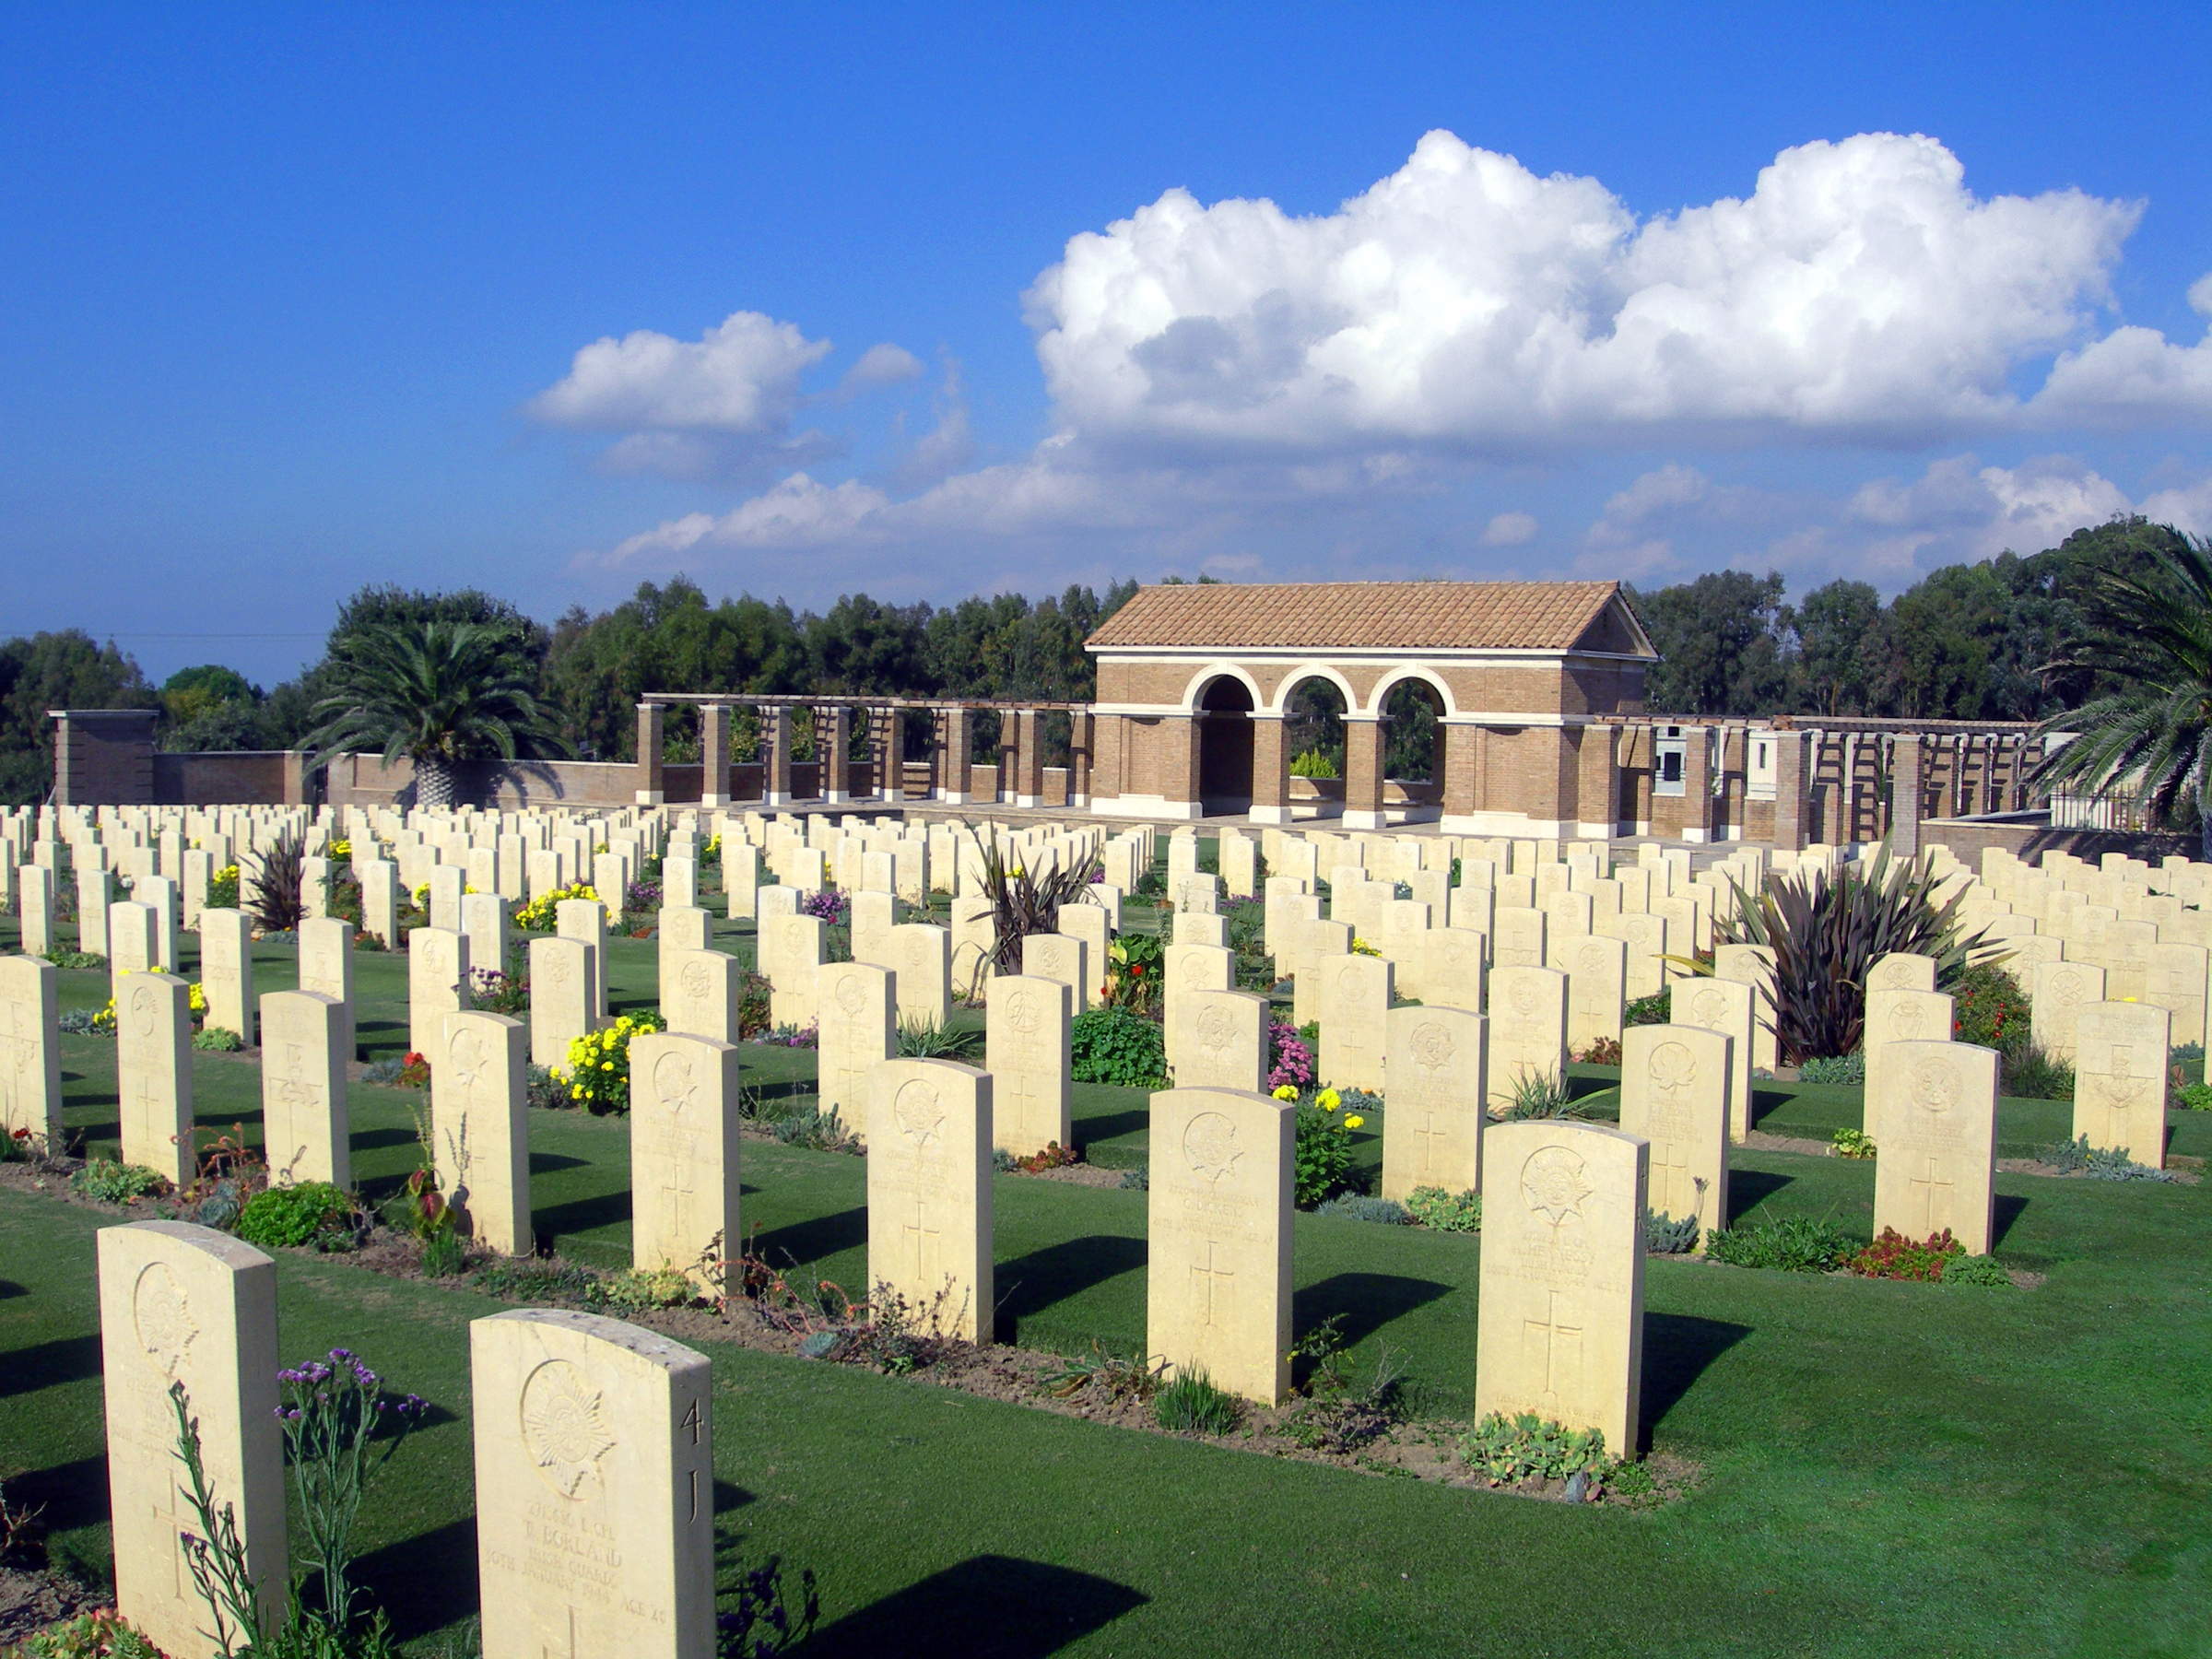 Anzio War Cemetery with its antiquity-inspired architecture.